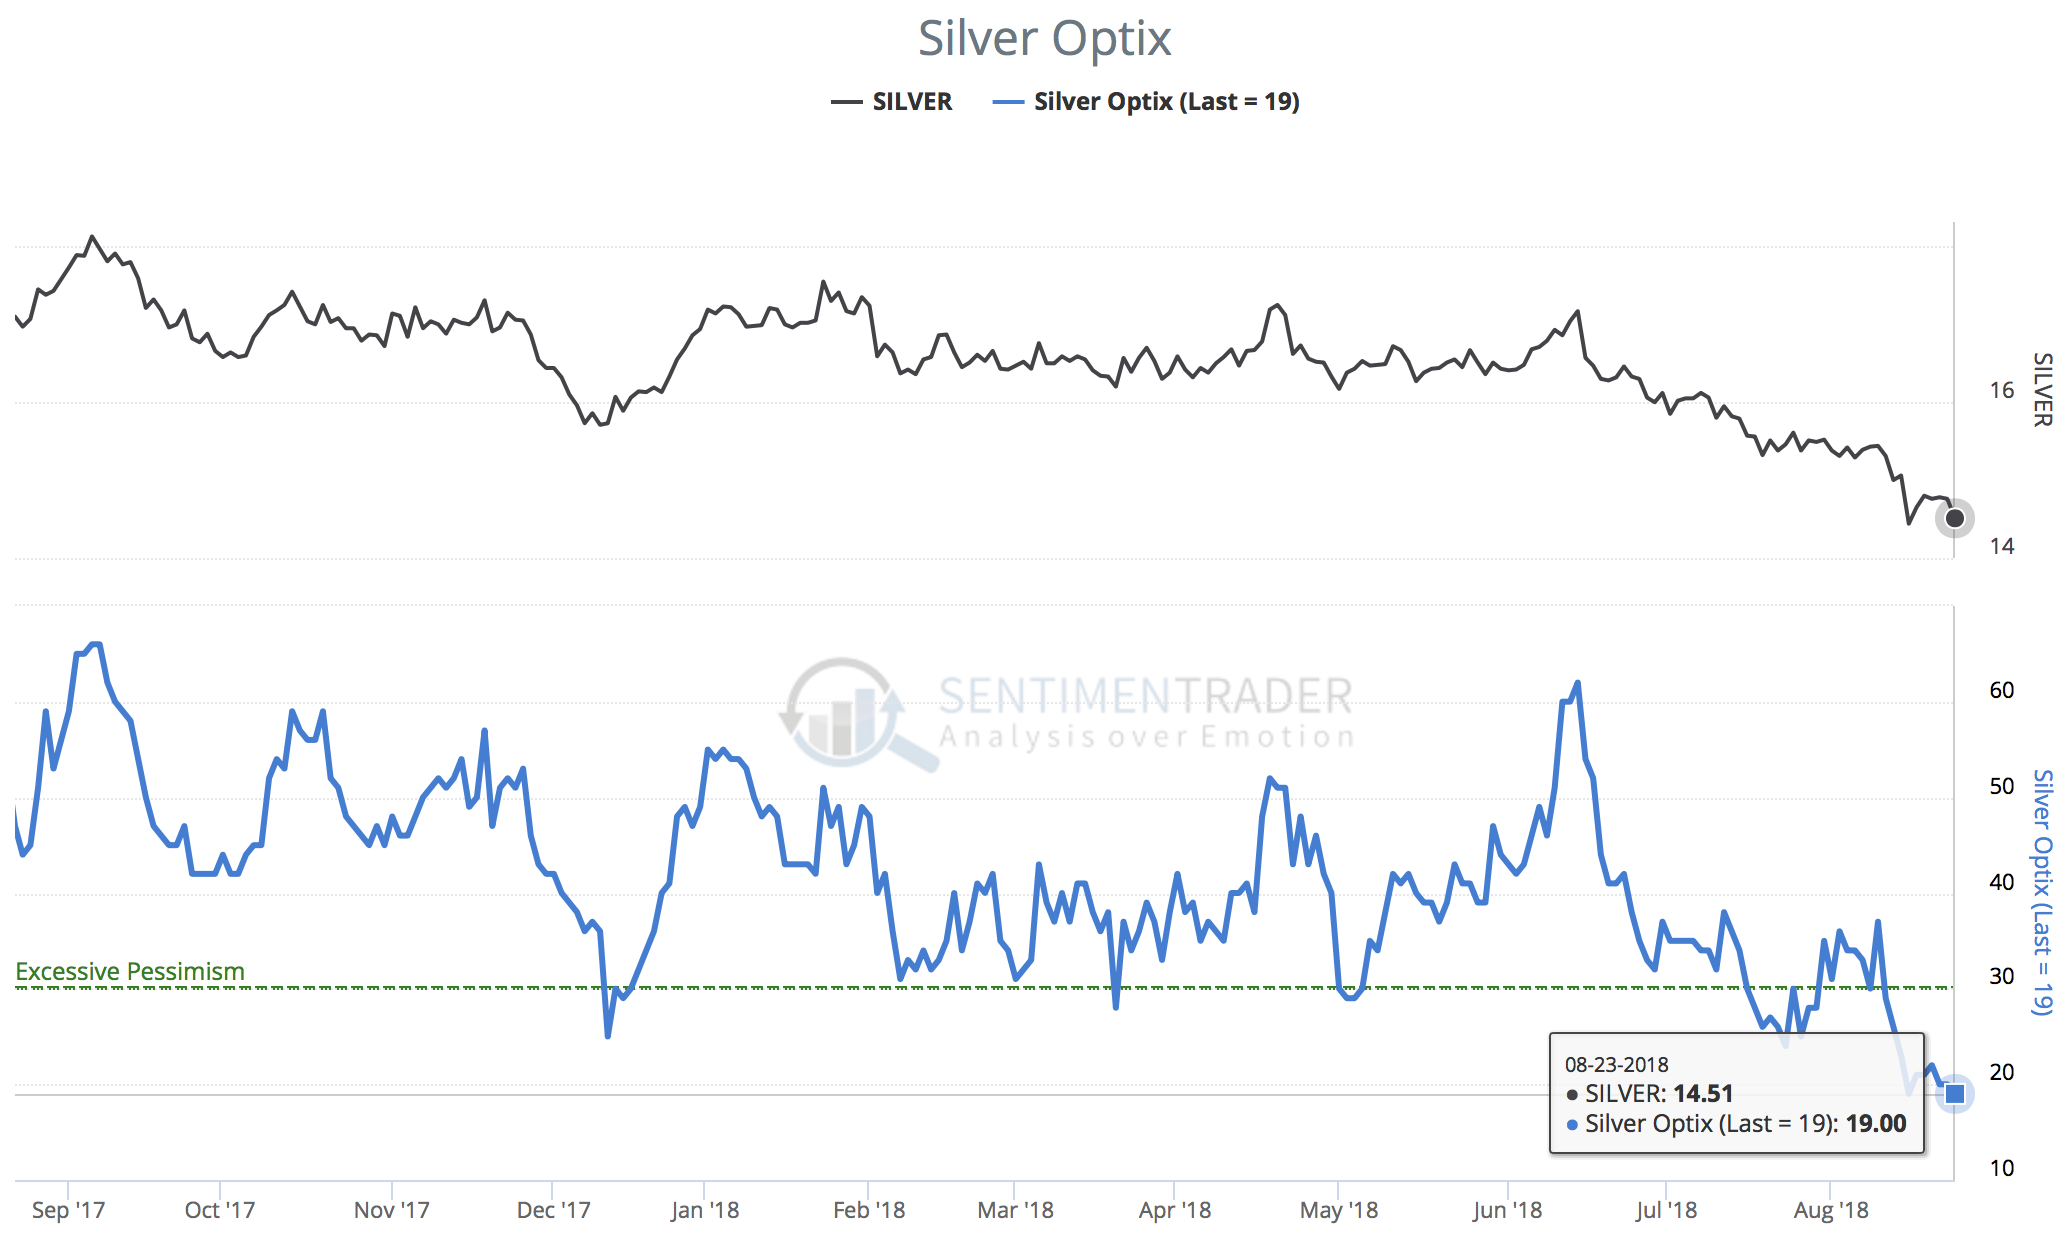 Silver Optix shows excessive pessimism and a beaten down sentiment